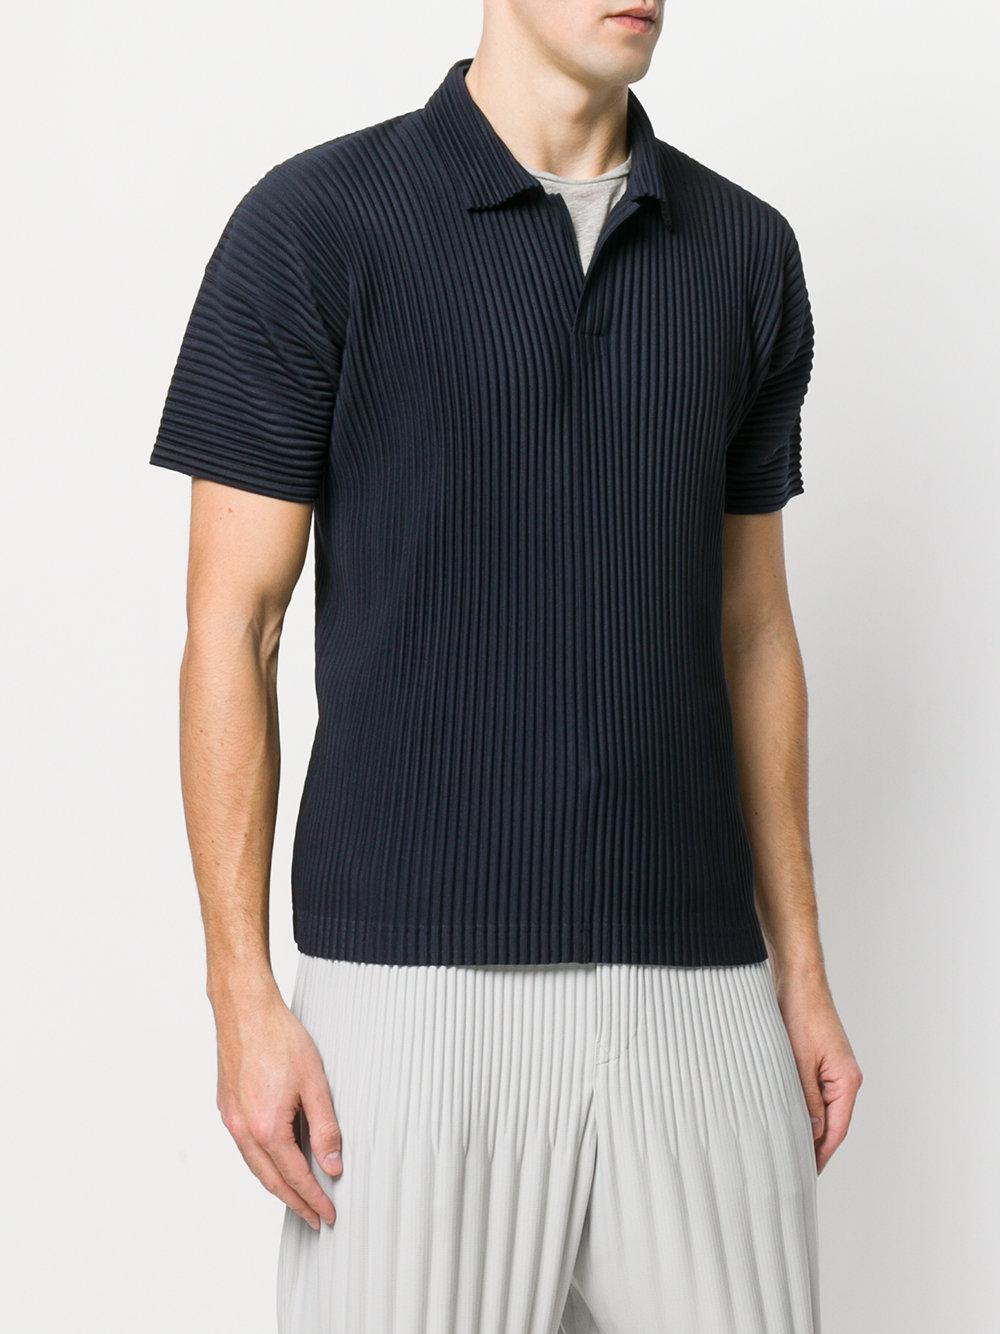 Homme Plissé Issey Miyake Ribbed Effect Polo Shirt in Blue for Men - Lyst